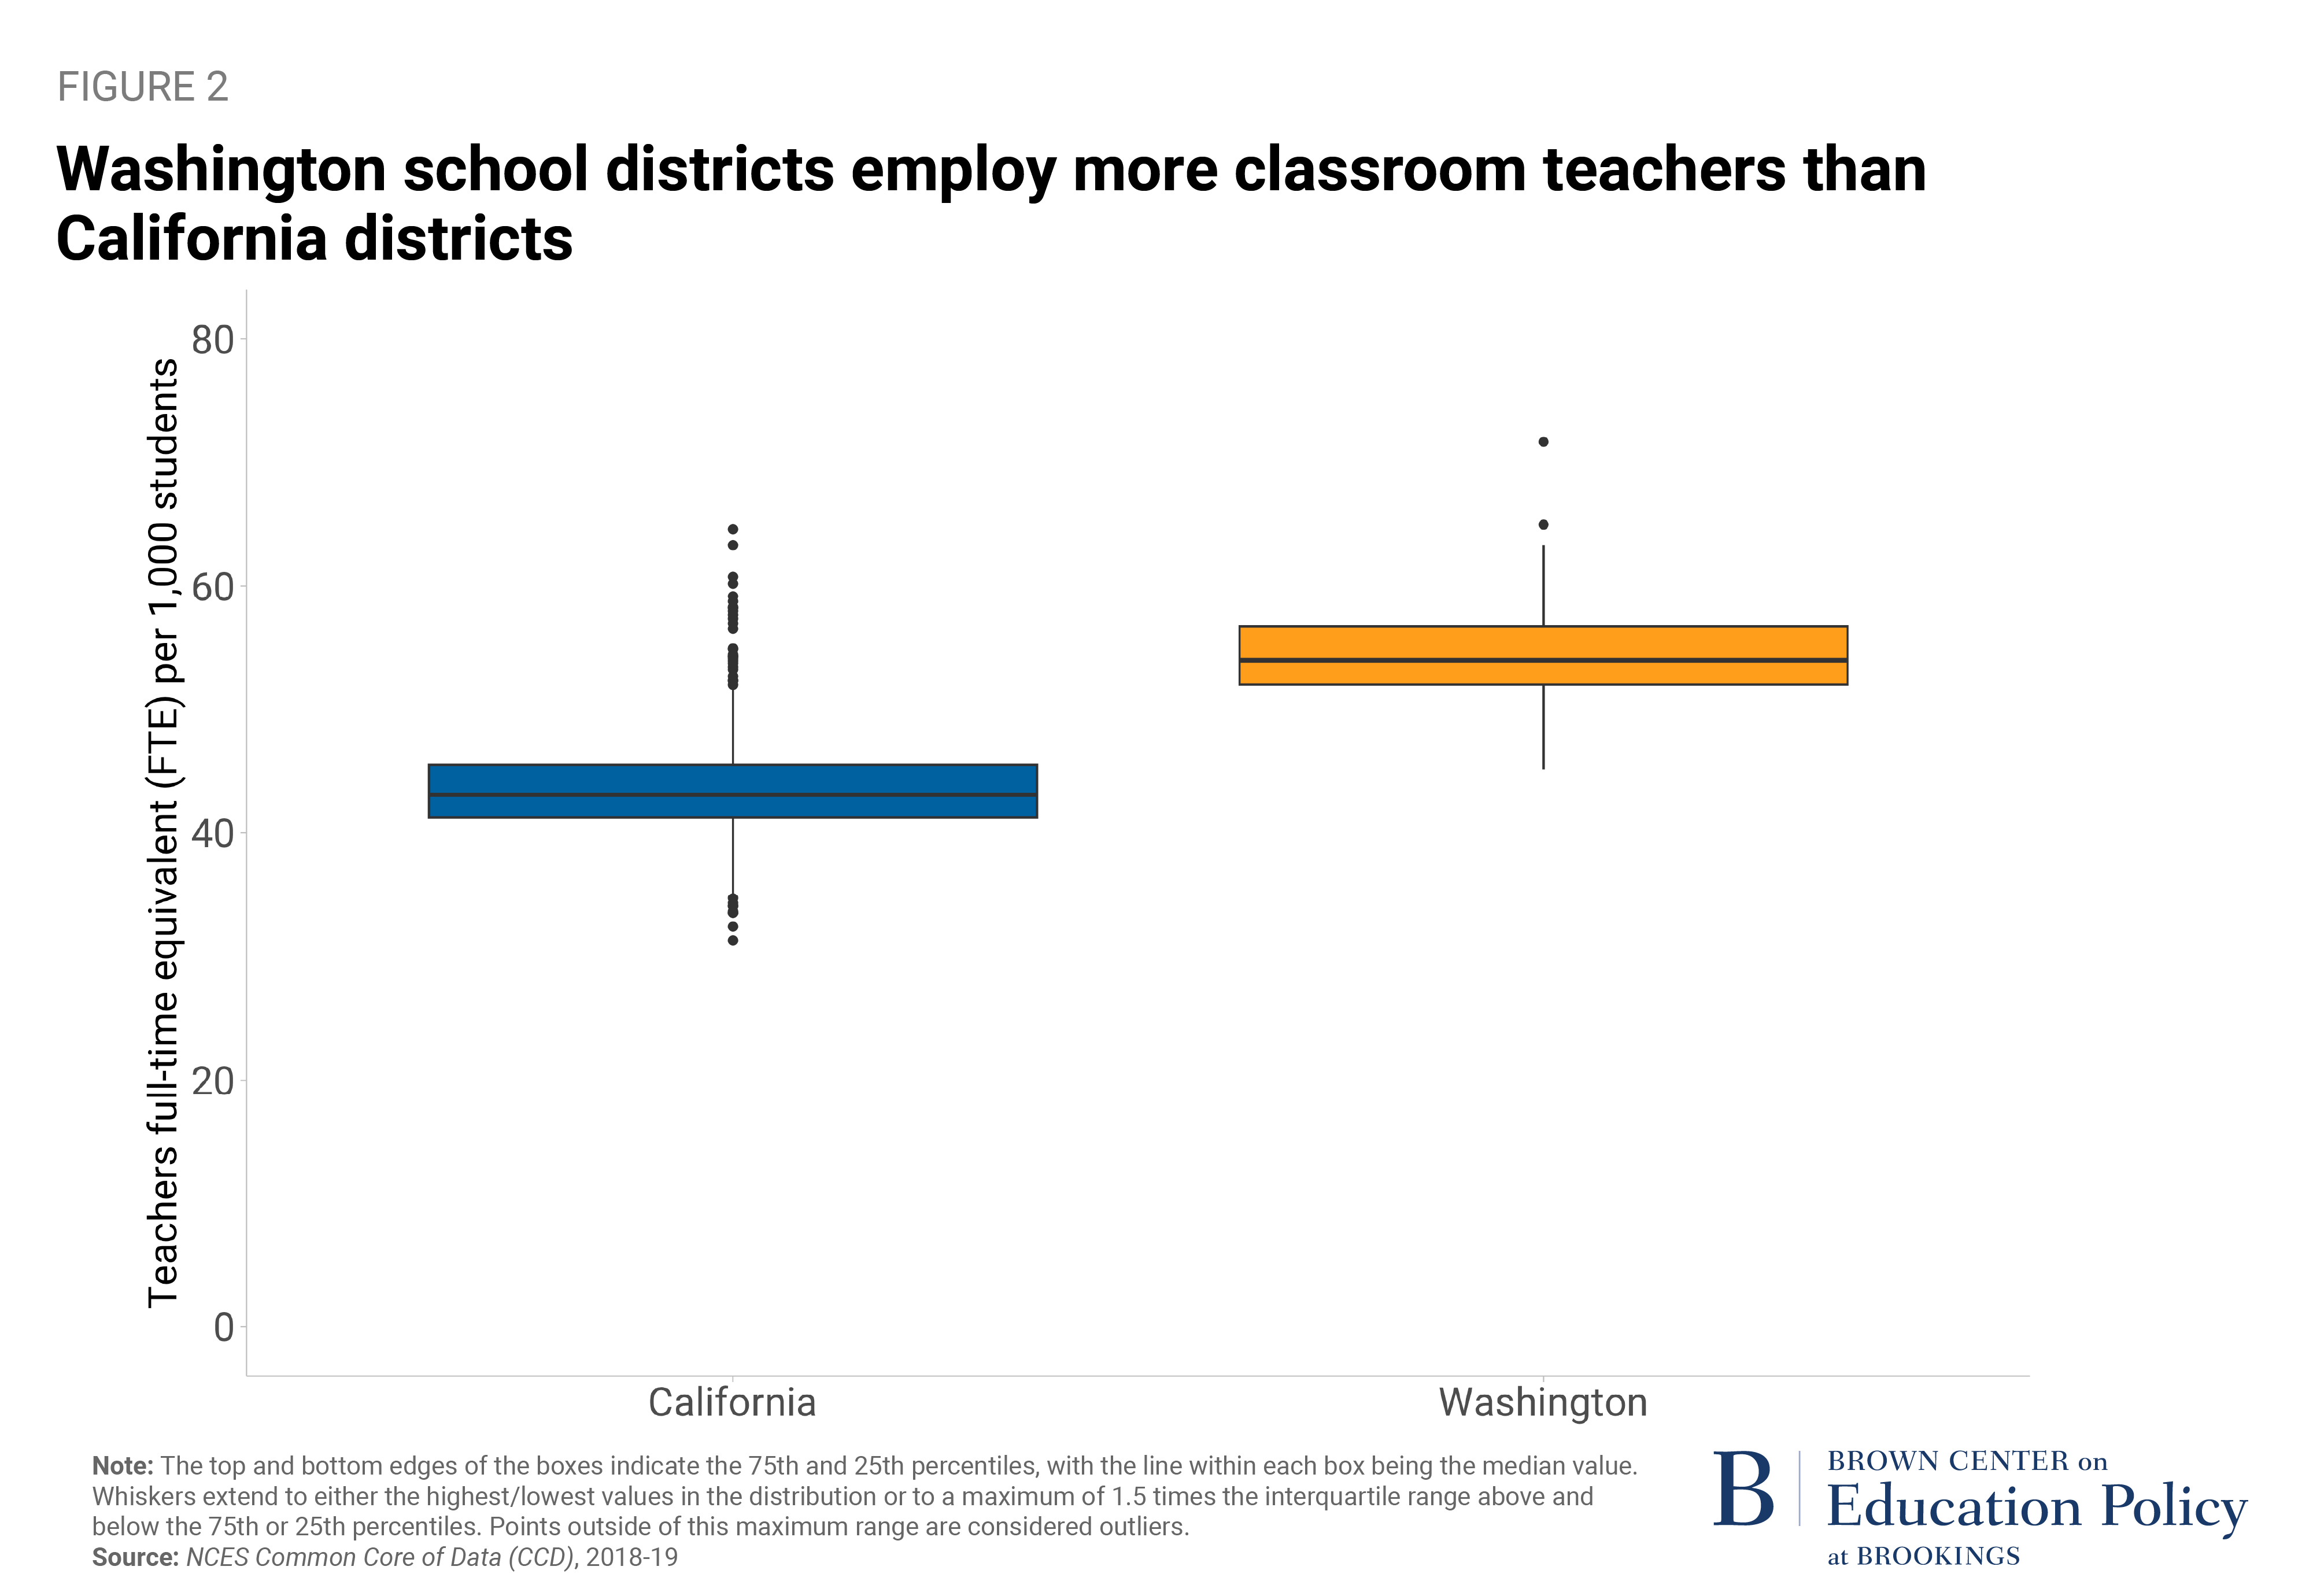 Figure showing Washington school districts employ more classroom teachers than California districts.